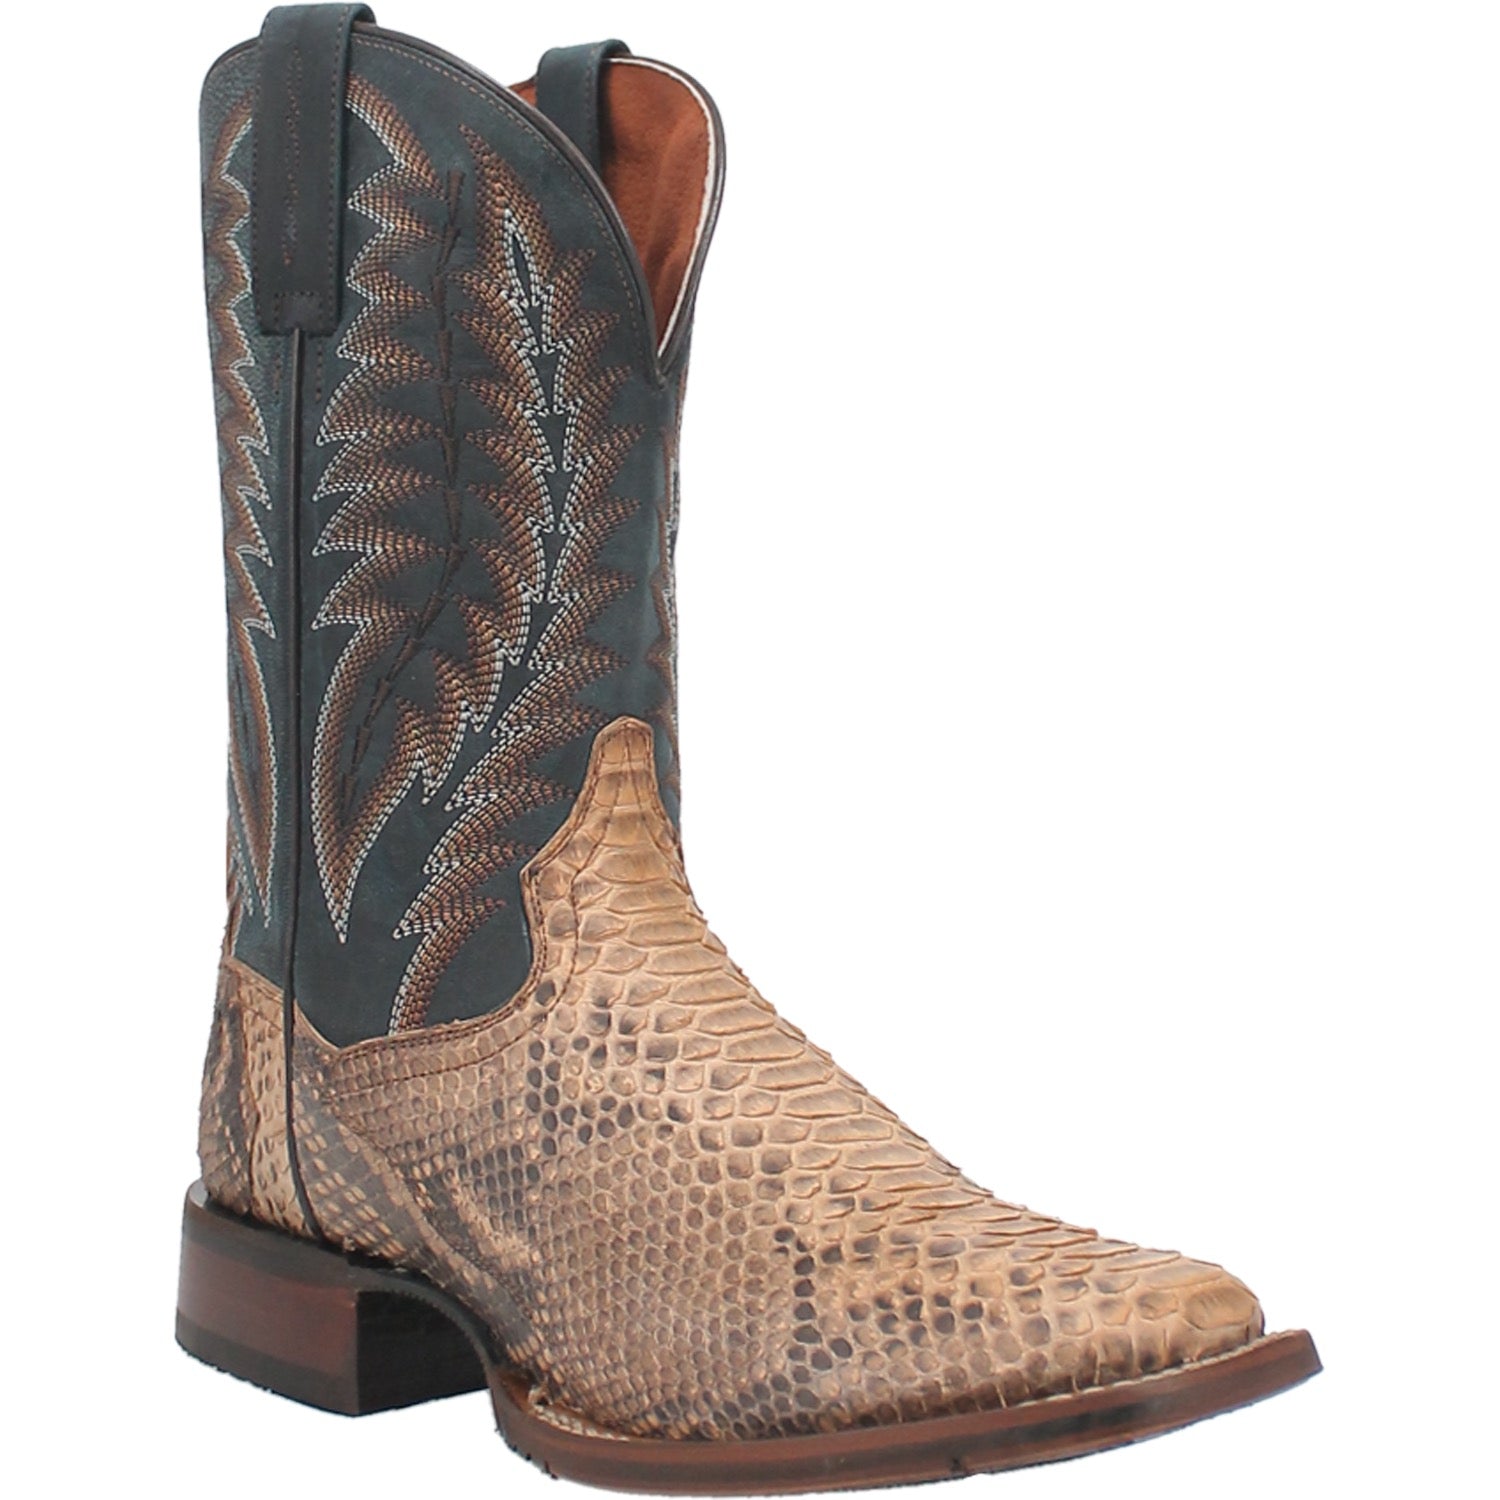 TEMPLETON PYTHON BOOT Cover